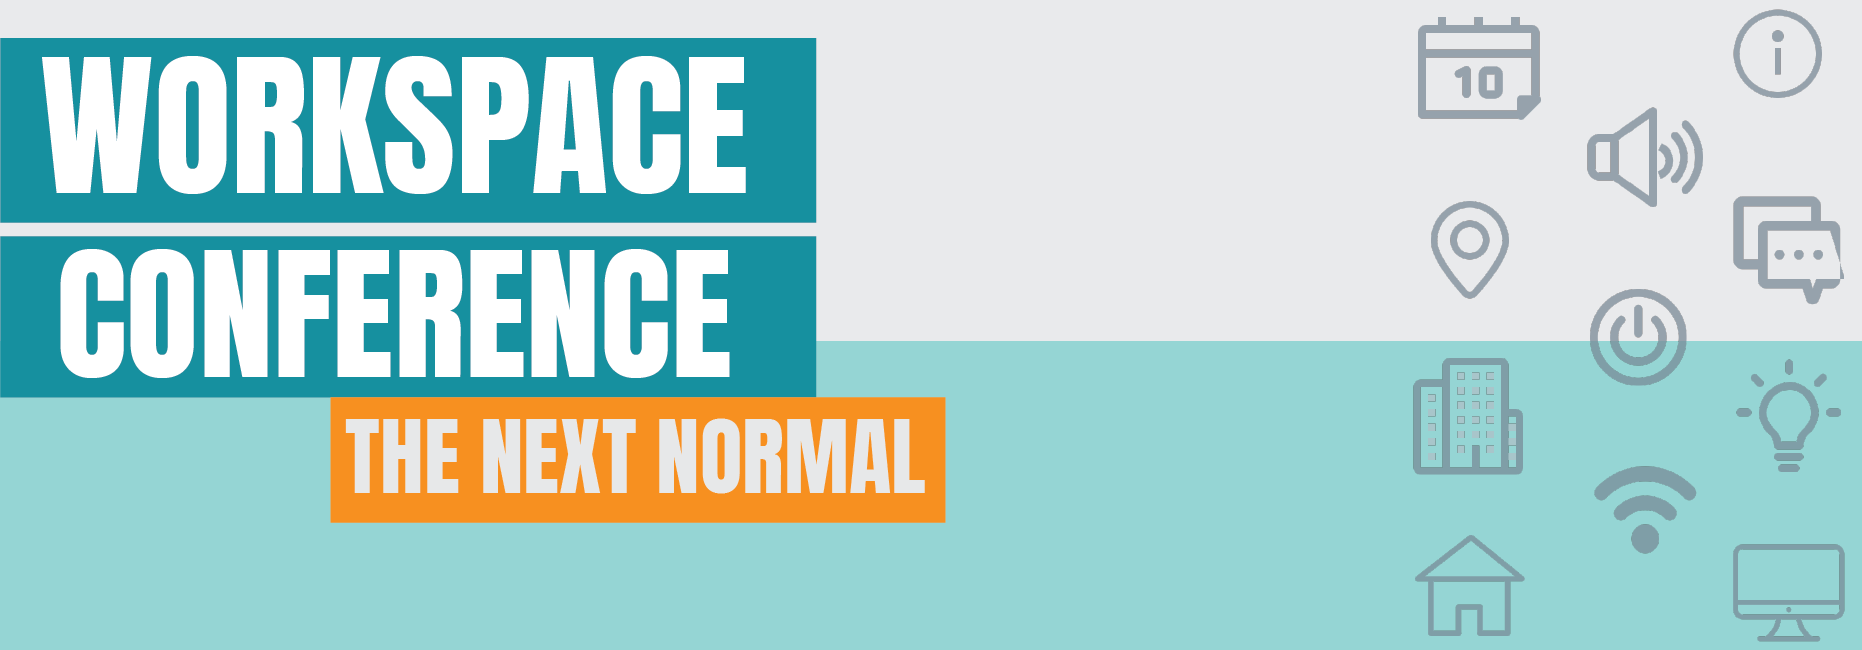 Workspace Conference: The Next Normal